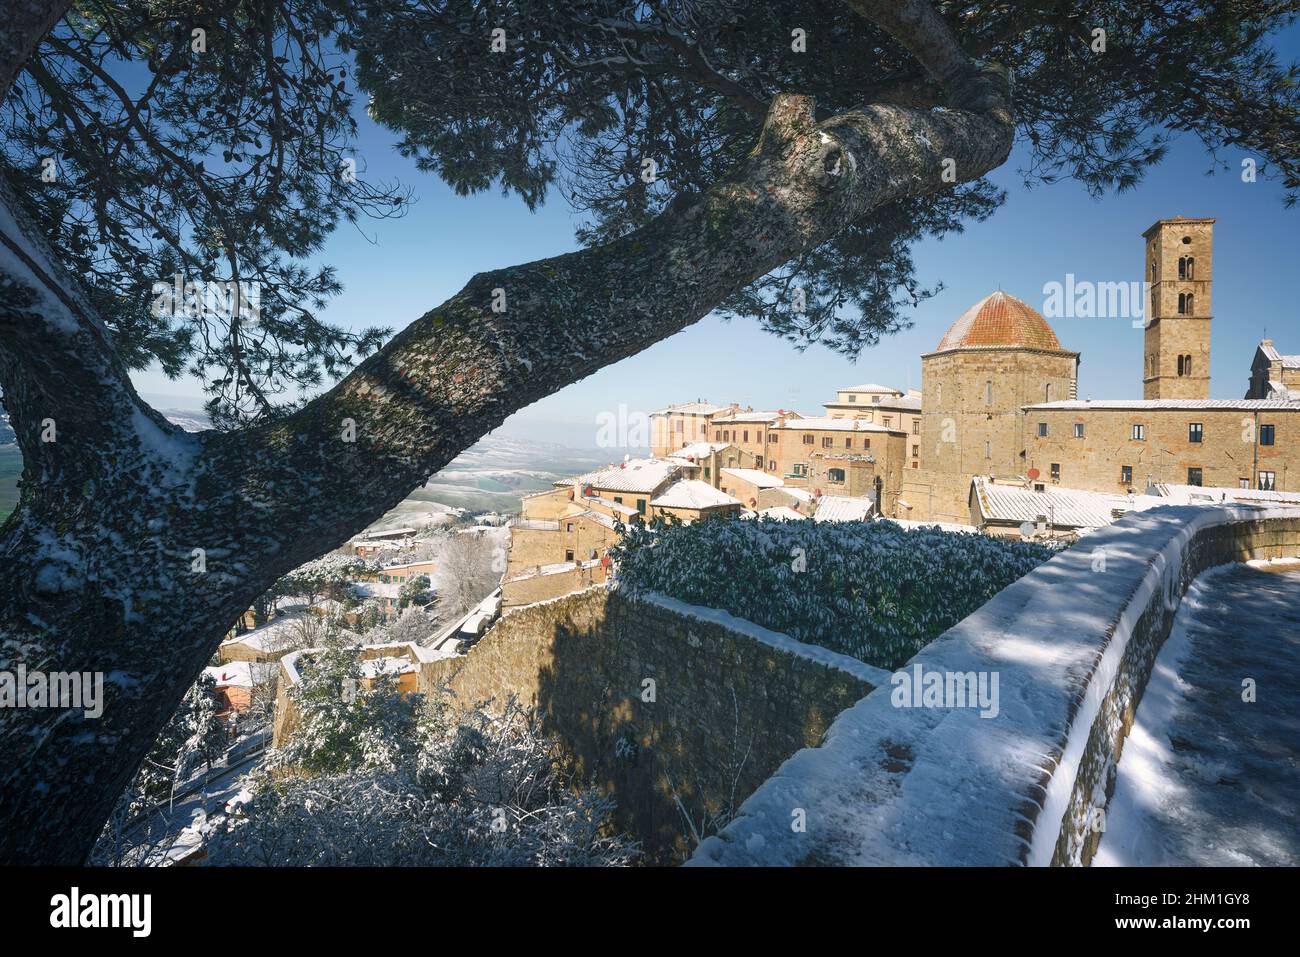 Volterra snowy town in winter and a tree. Pisa province, Tuscany region, Italy, Europe. Stock Photo